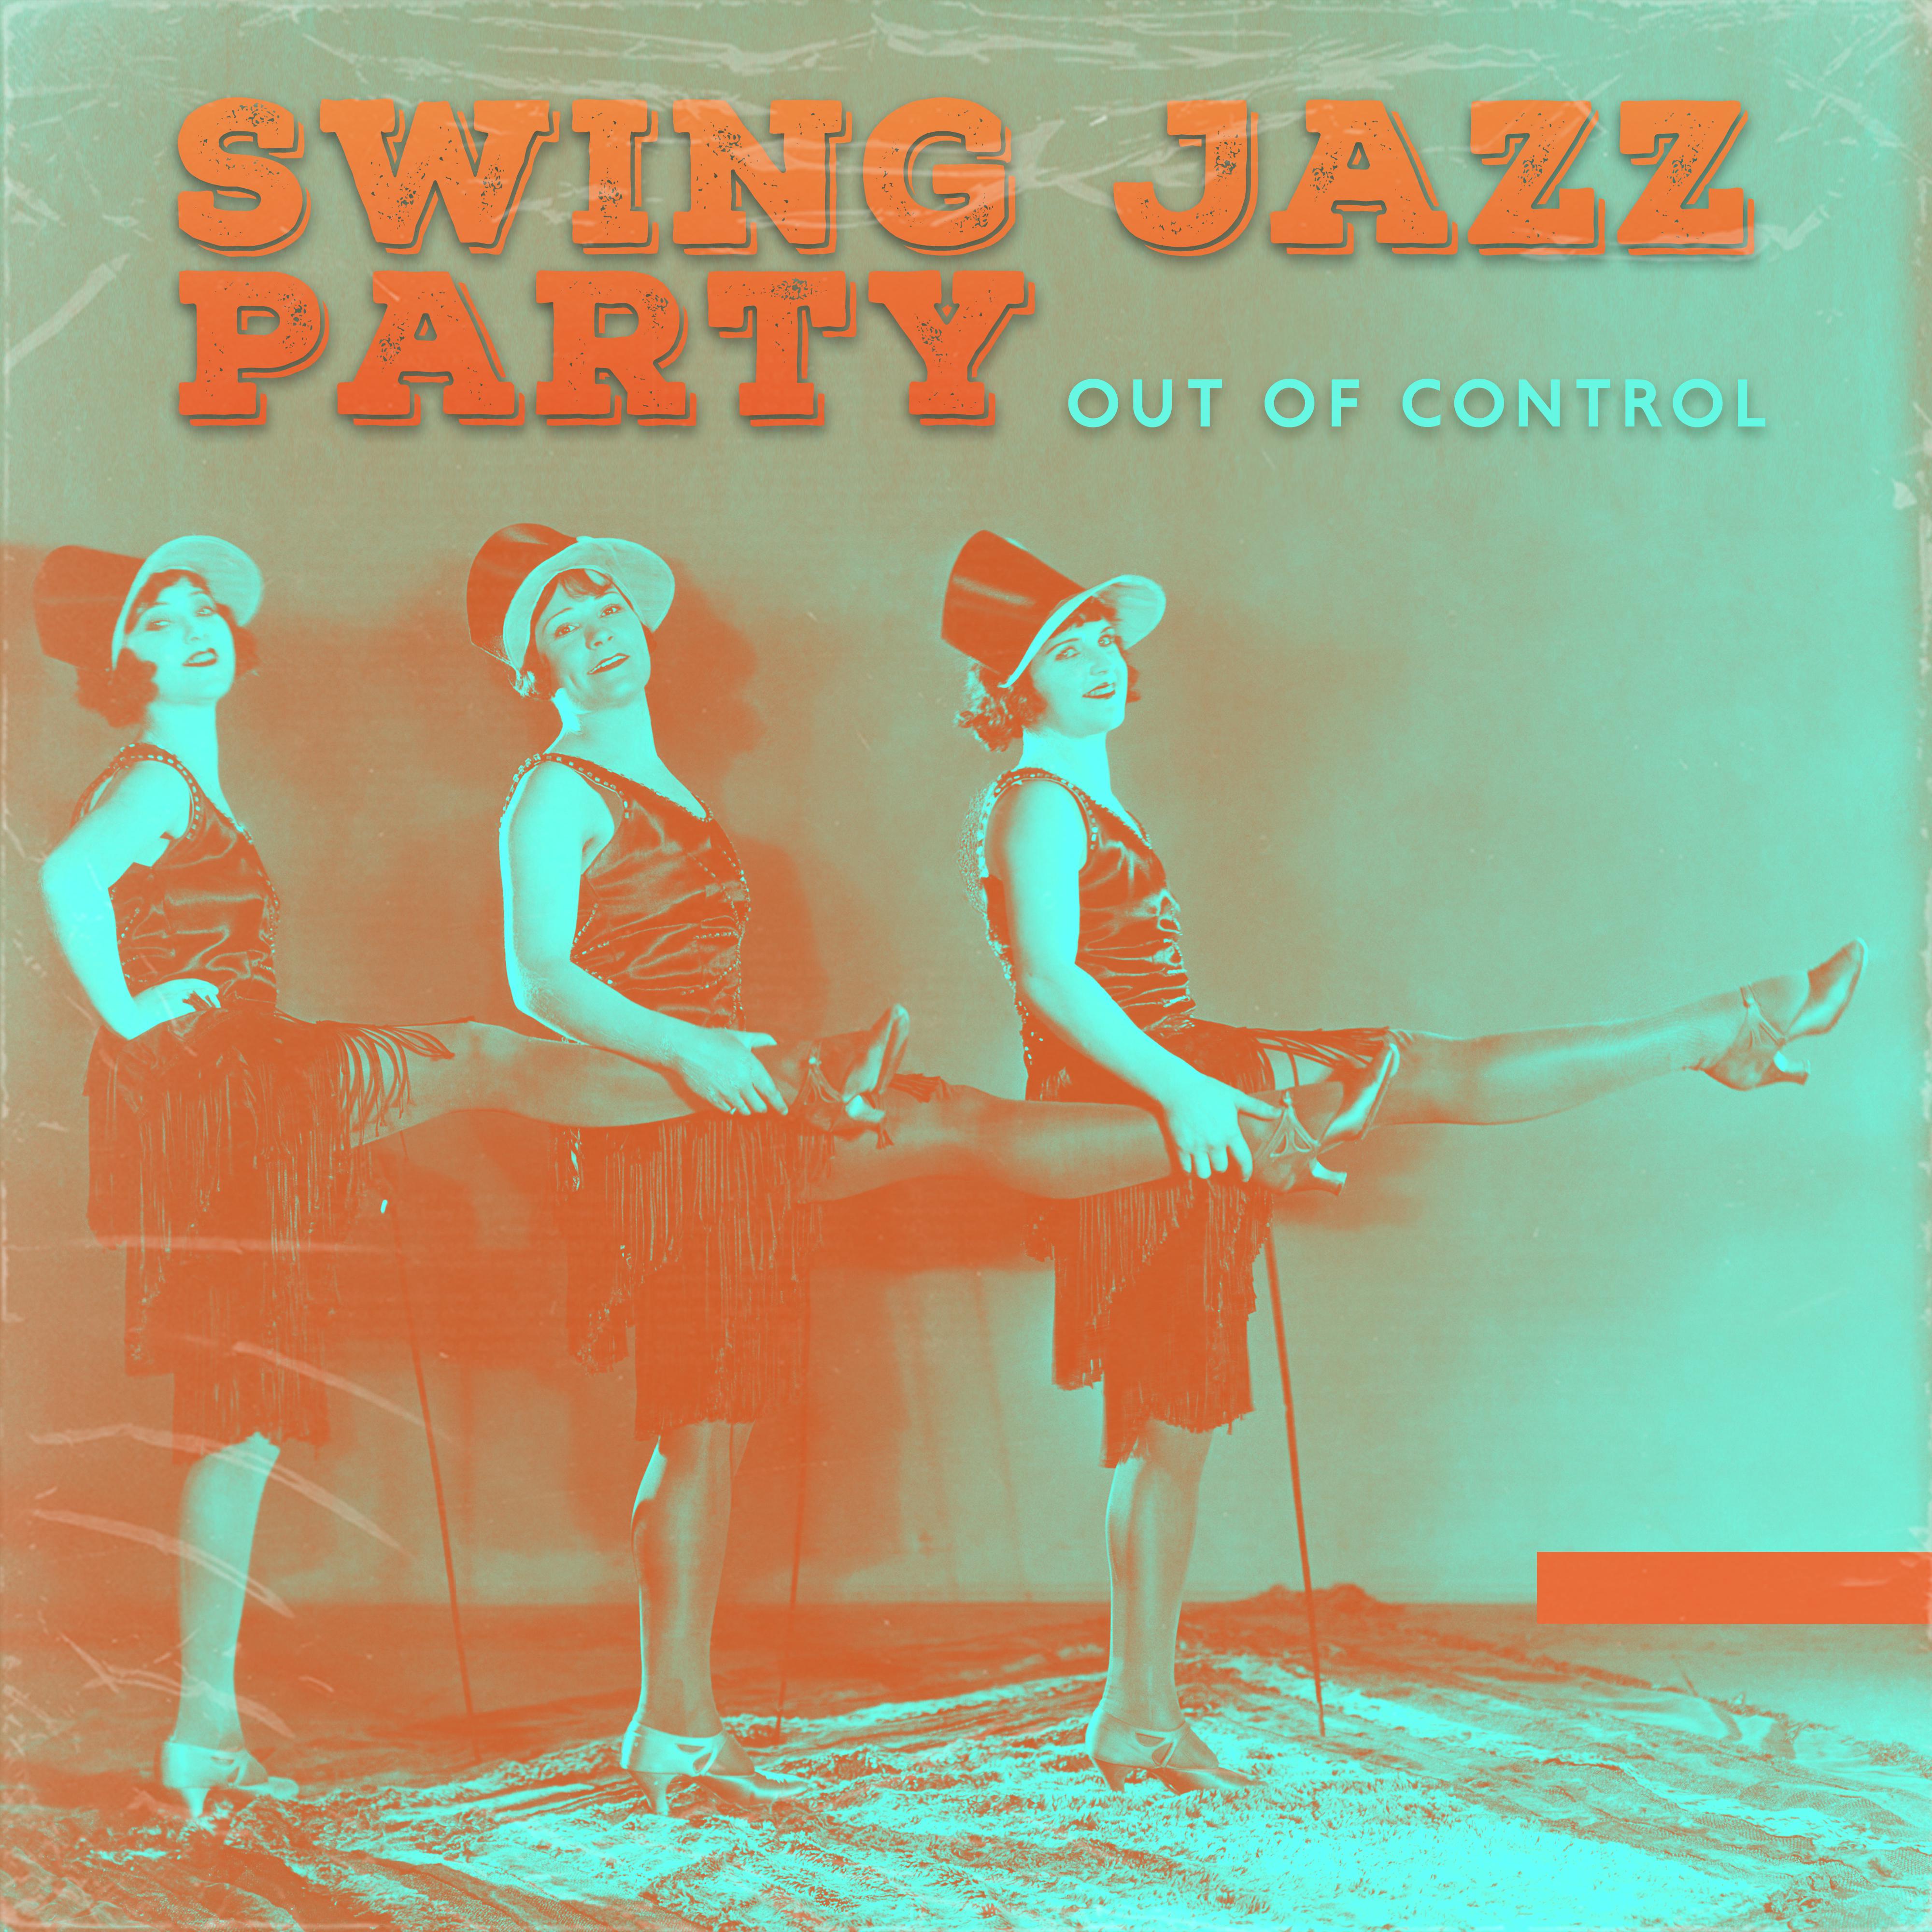 Swing Jazz Party Out of Control  2019 Instrumental Smooth Jazz Happy Music Collection for Vintage Styled Dance Party, Oldschool Songs with Beautiful Sounds of Piano, Contrabass, Sax, Trumpet  More